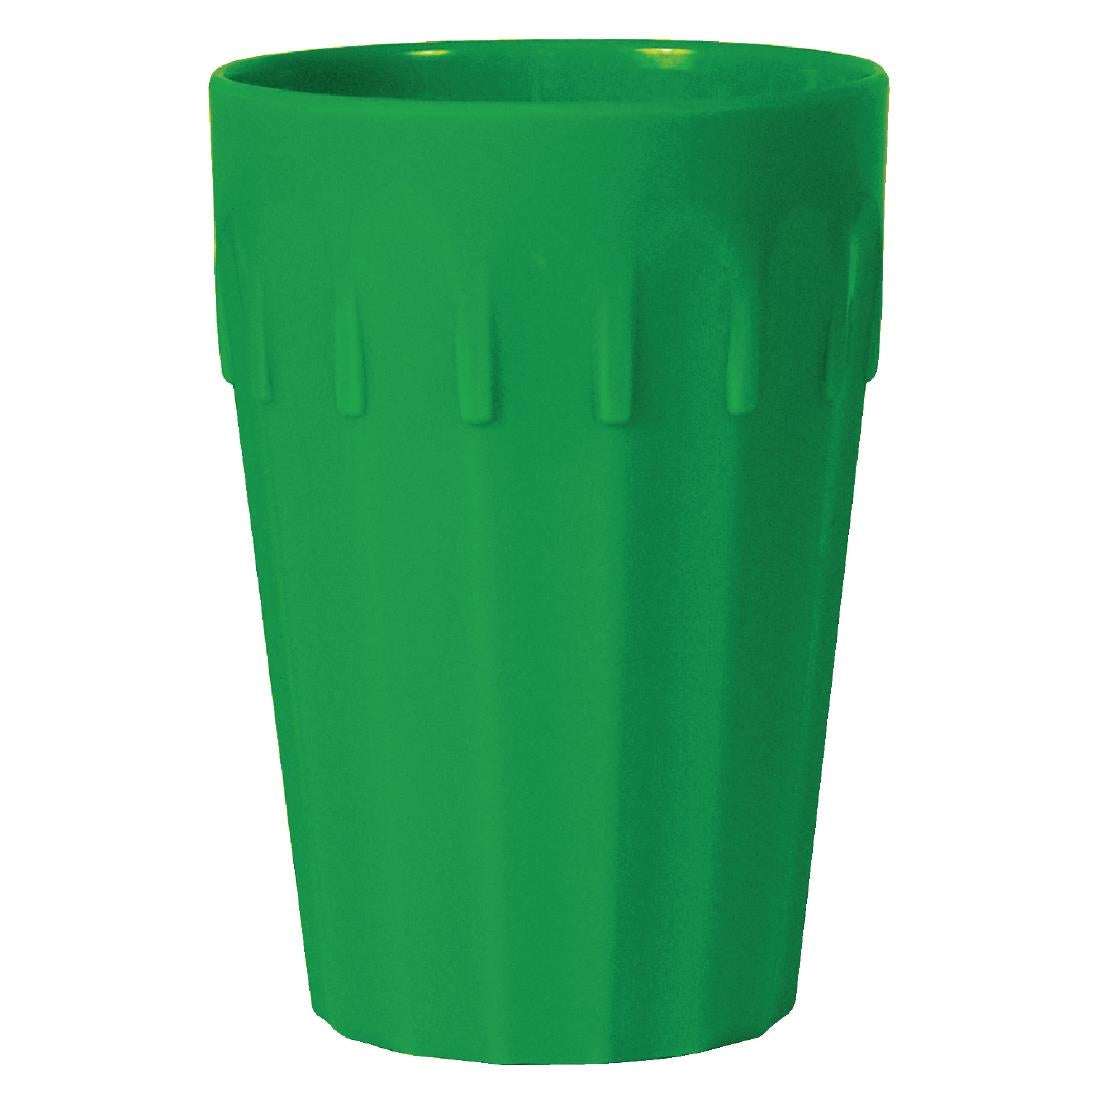 CE271 Olympia Kristallon Polycarbonate Tumblers Green 142ml (Pack of 12)